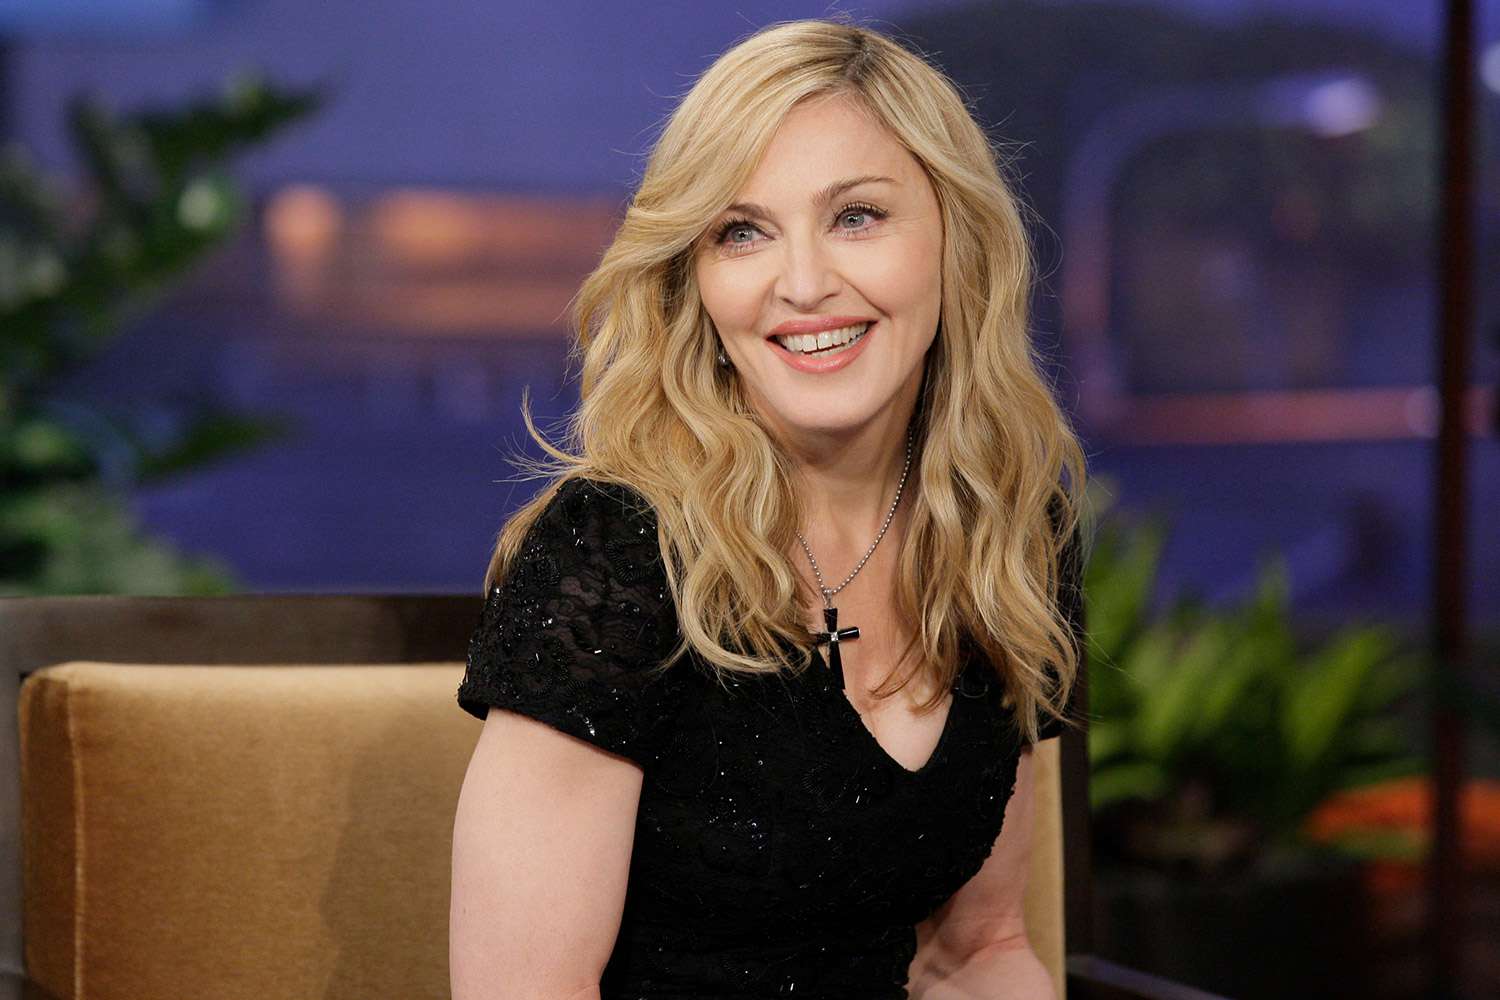 Madonna Playfully Calls Out Andy Cohen During Concert